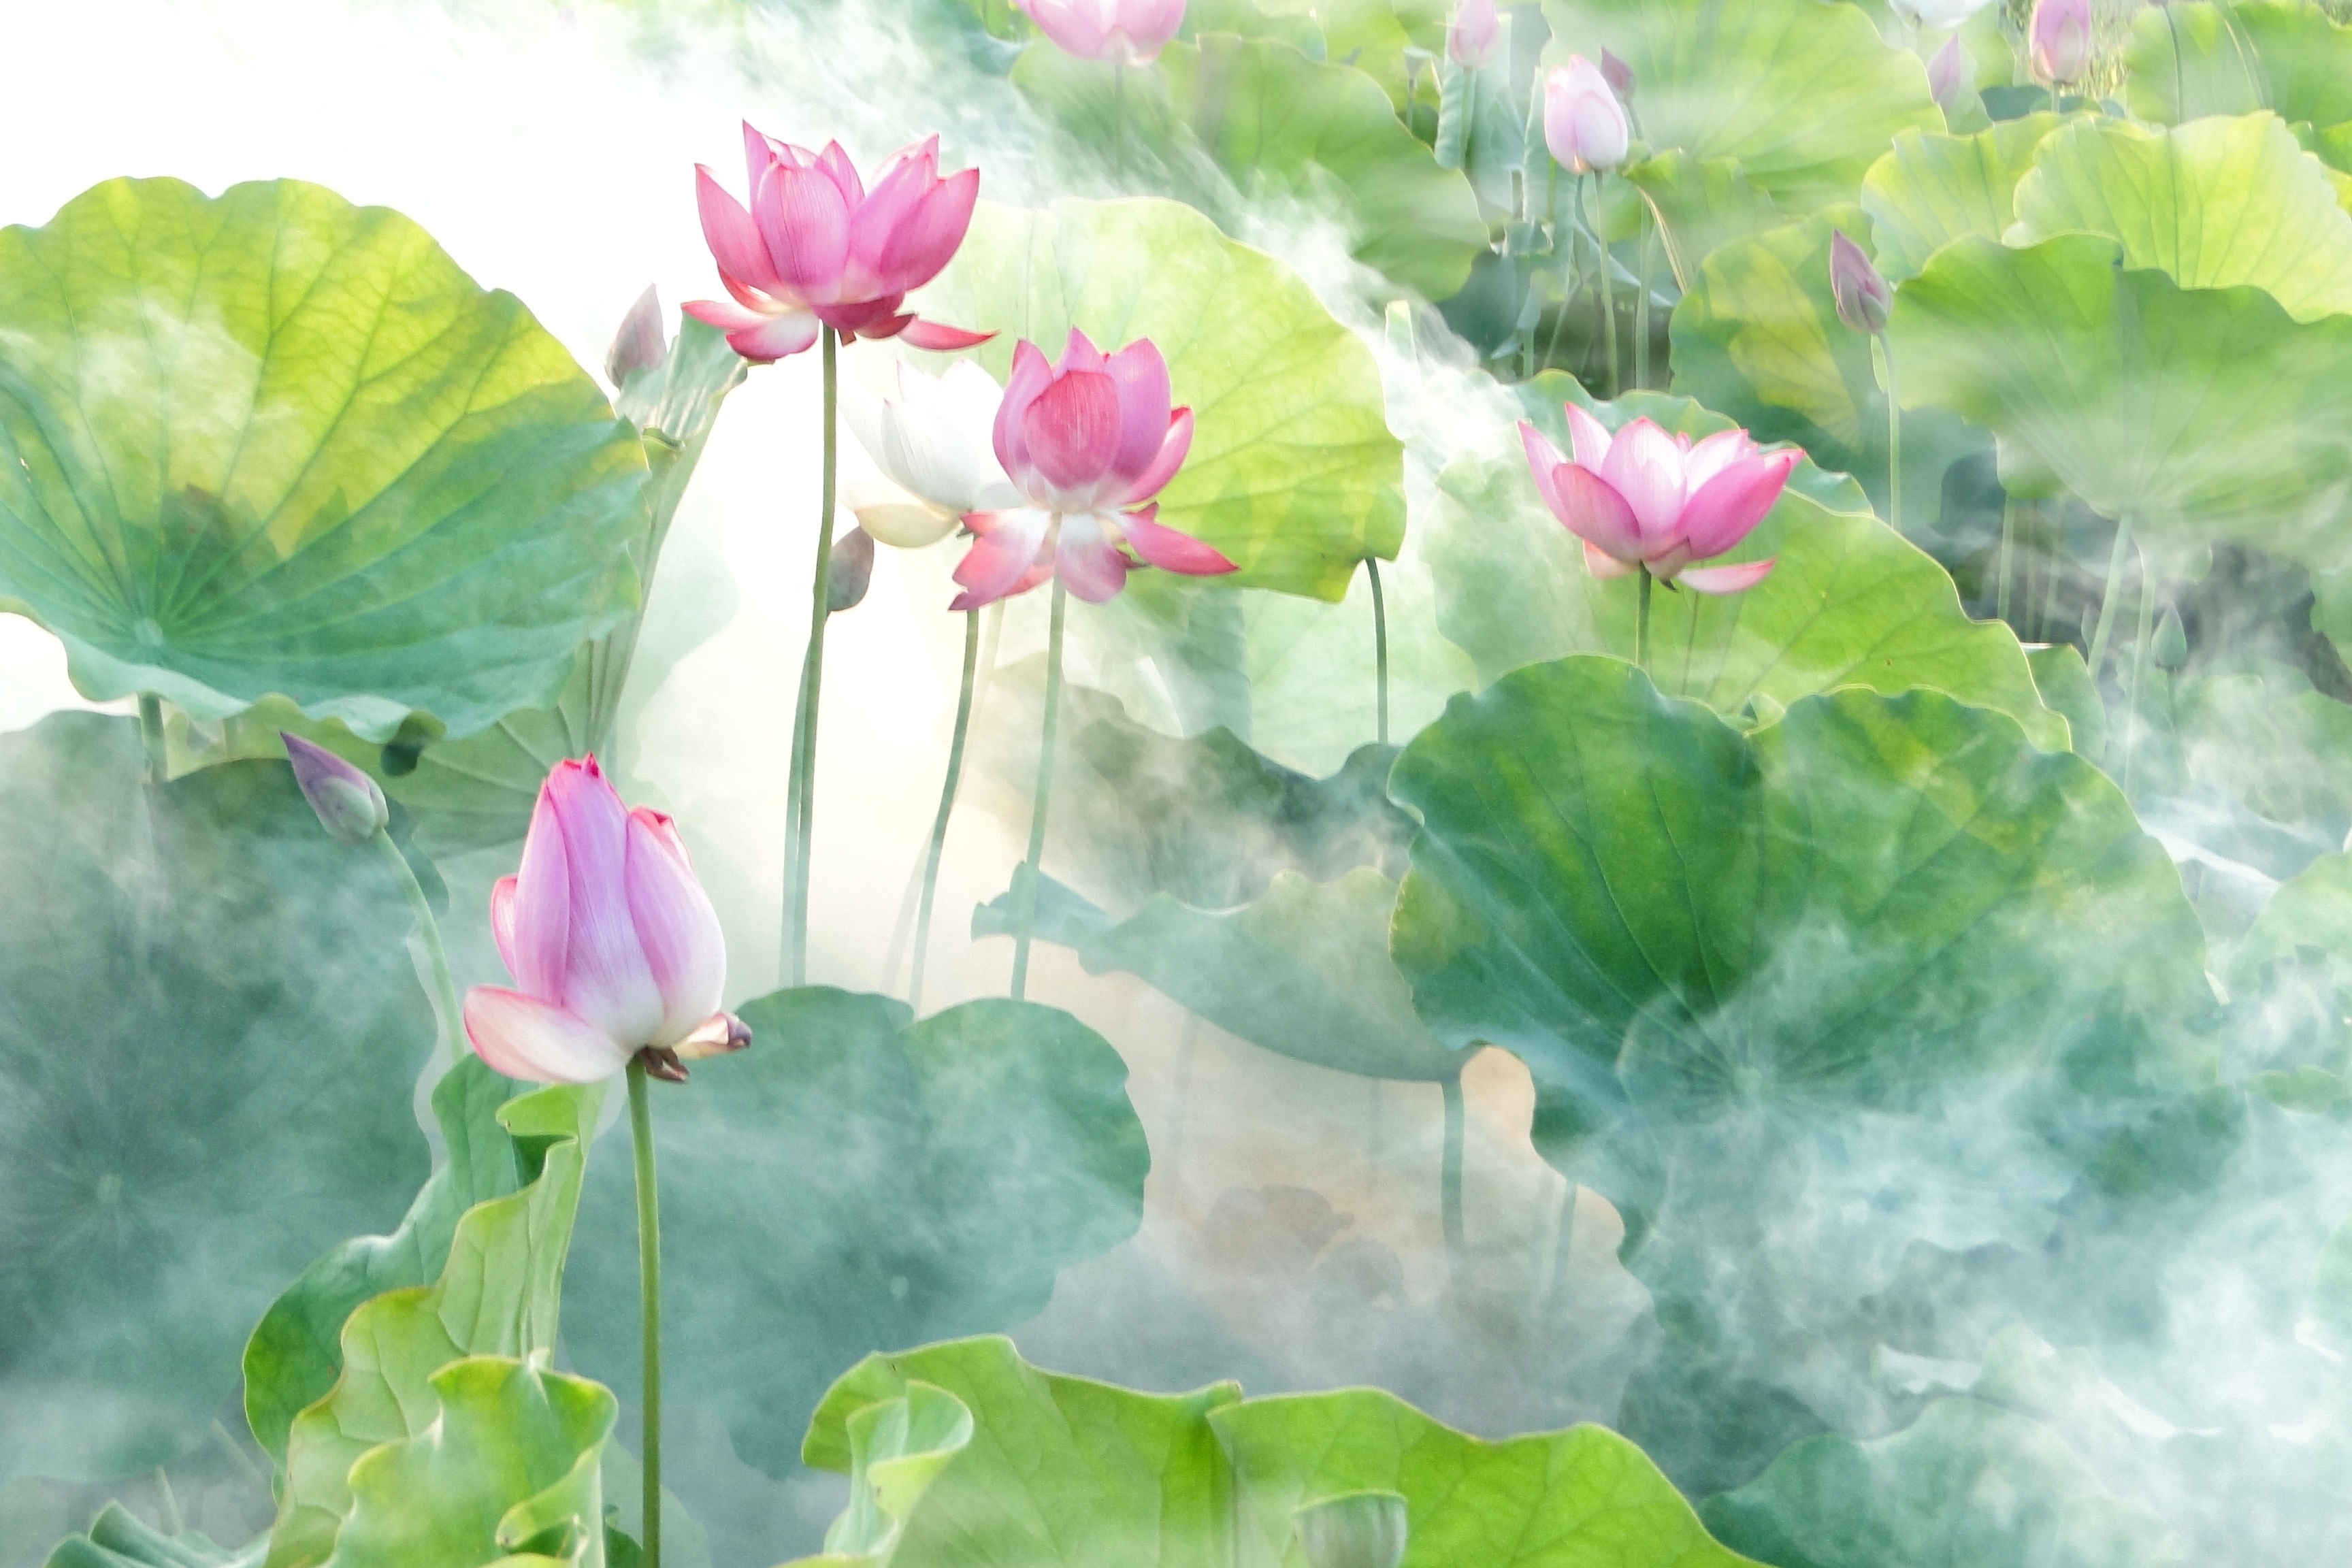 Lotuses Lounge in Morning Mists